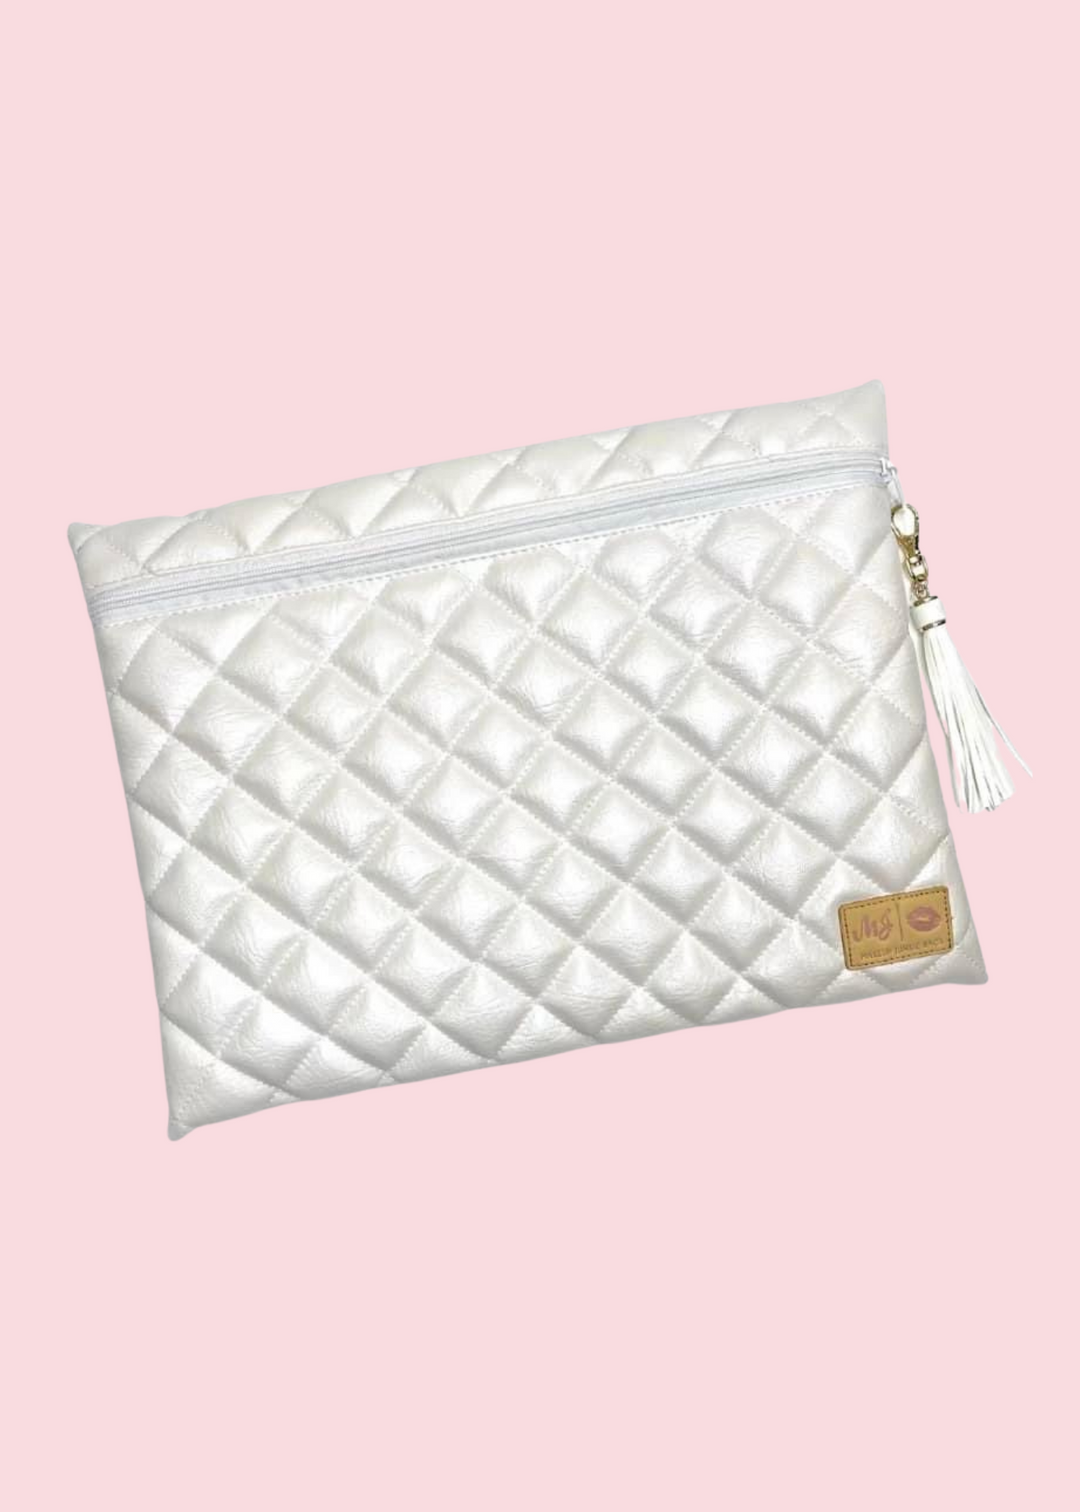 Makeup Junkie Bags - Luxe Ivory Pearl Quilted Laptop Case [Pre-Order]